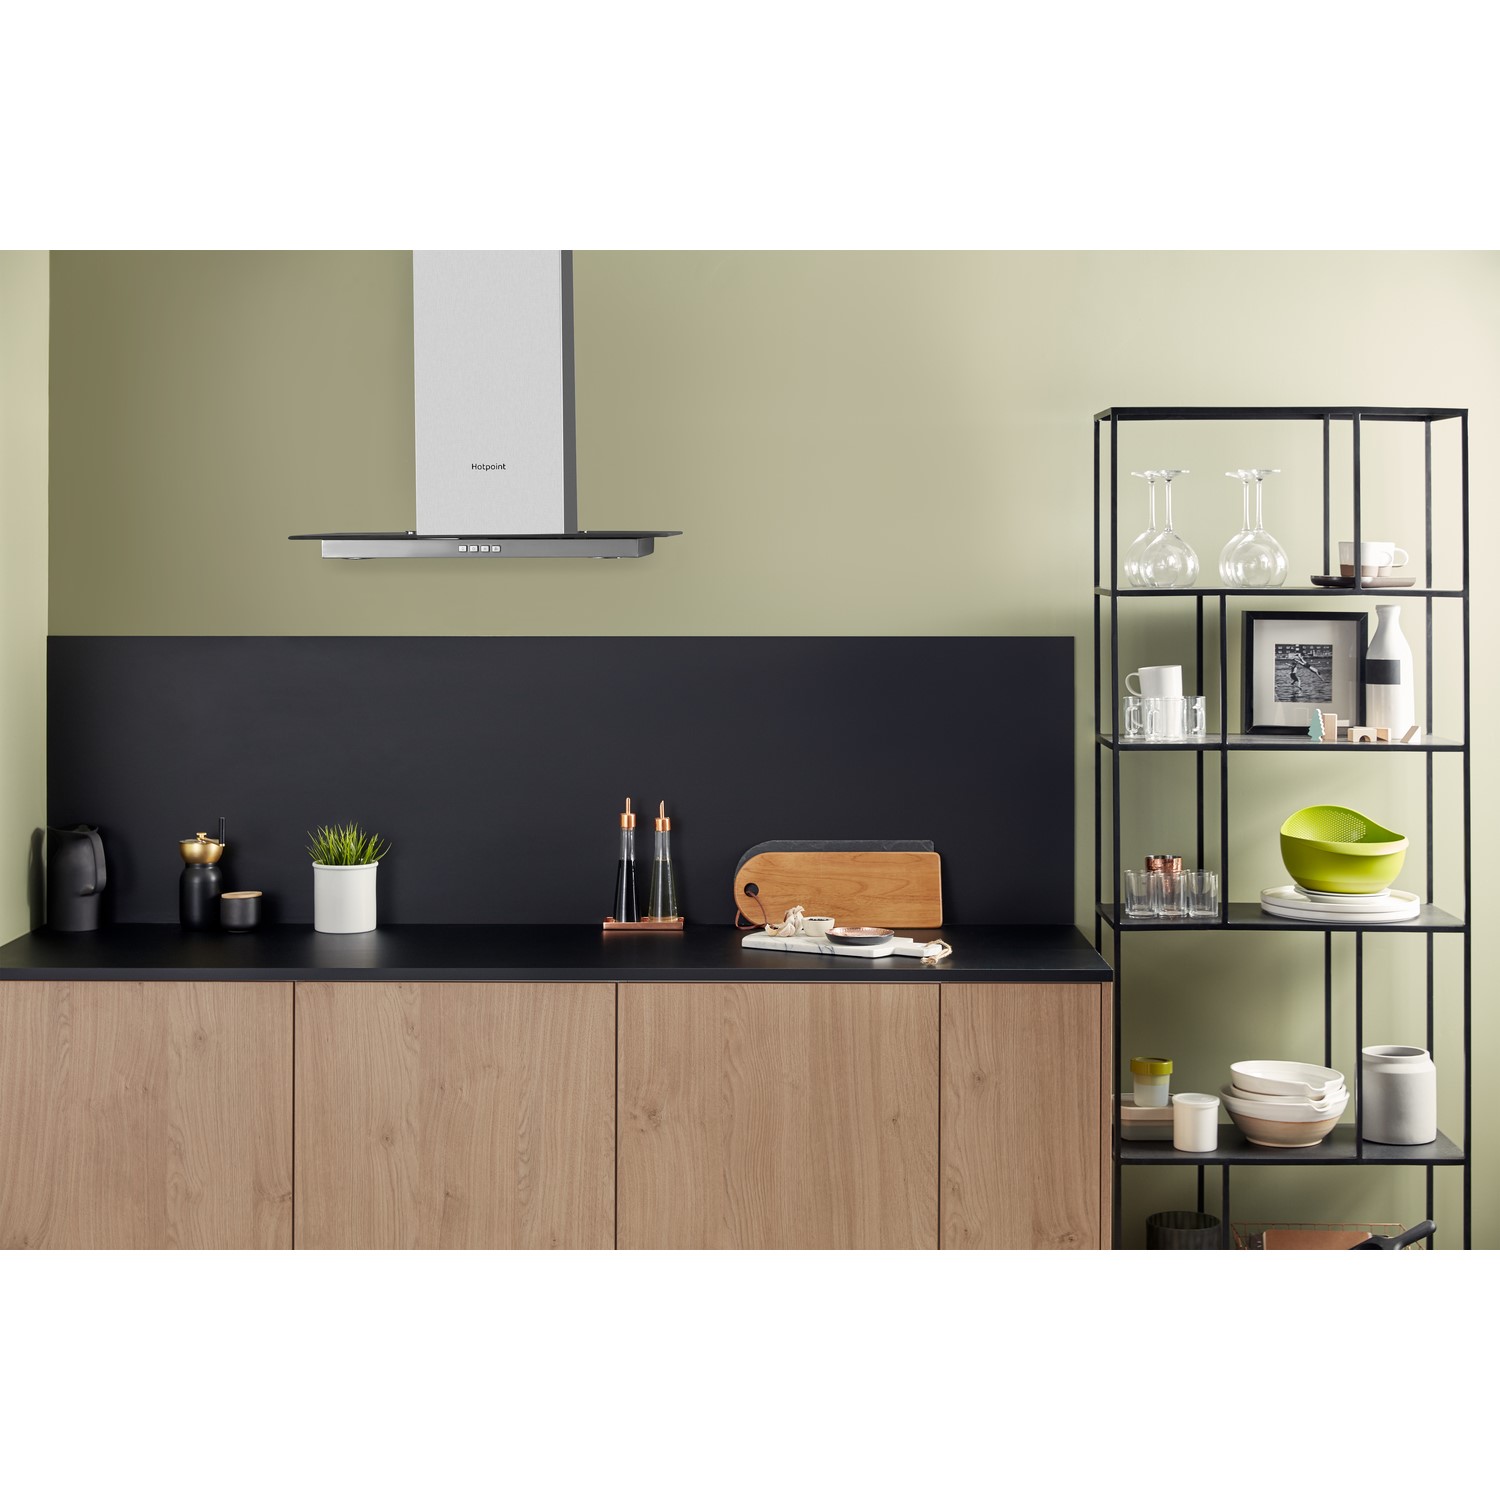 Hotpoint PHFG64FLMX 60cm Chimney Cooker Hood  With Flat 